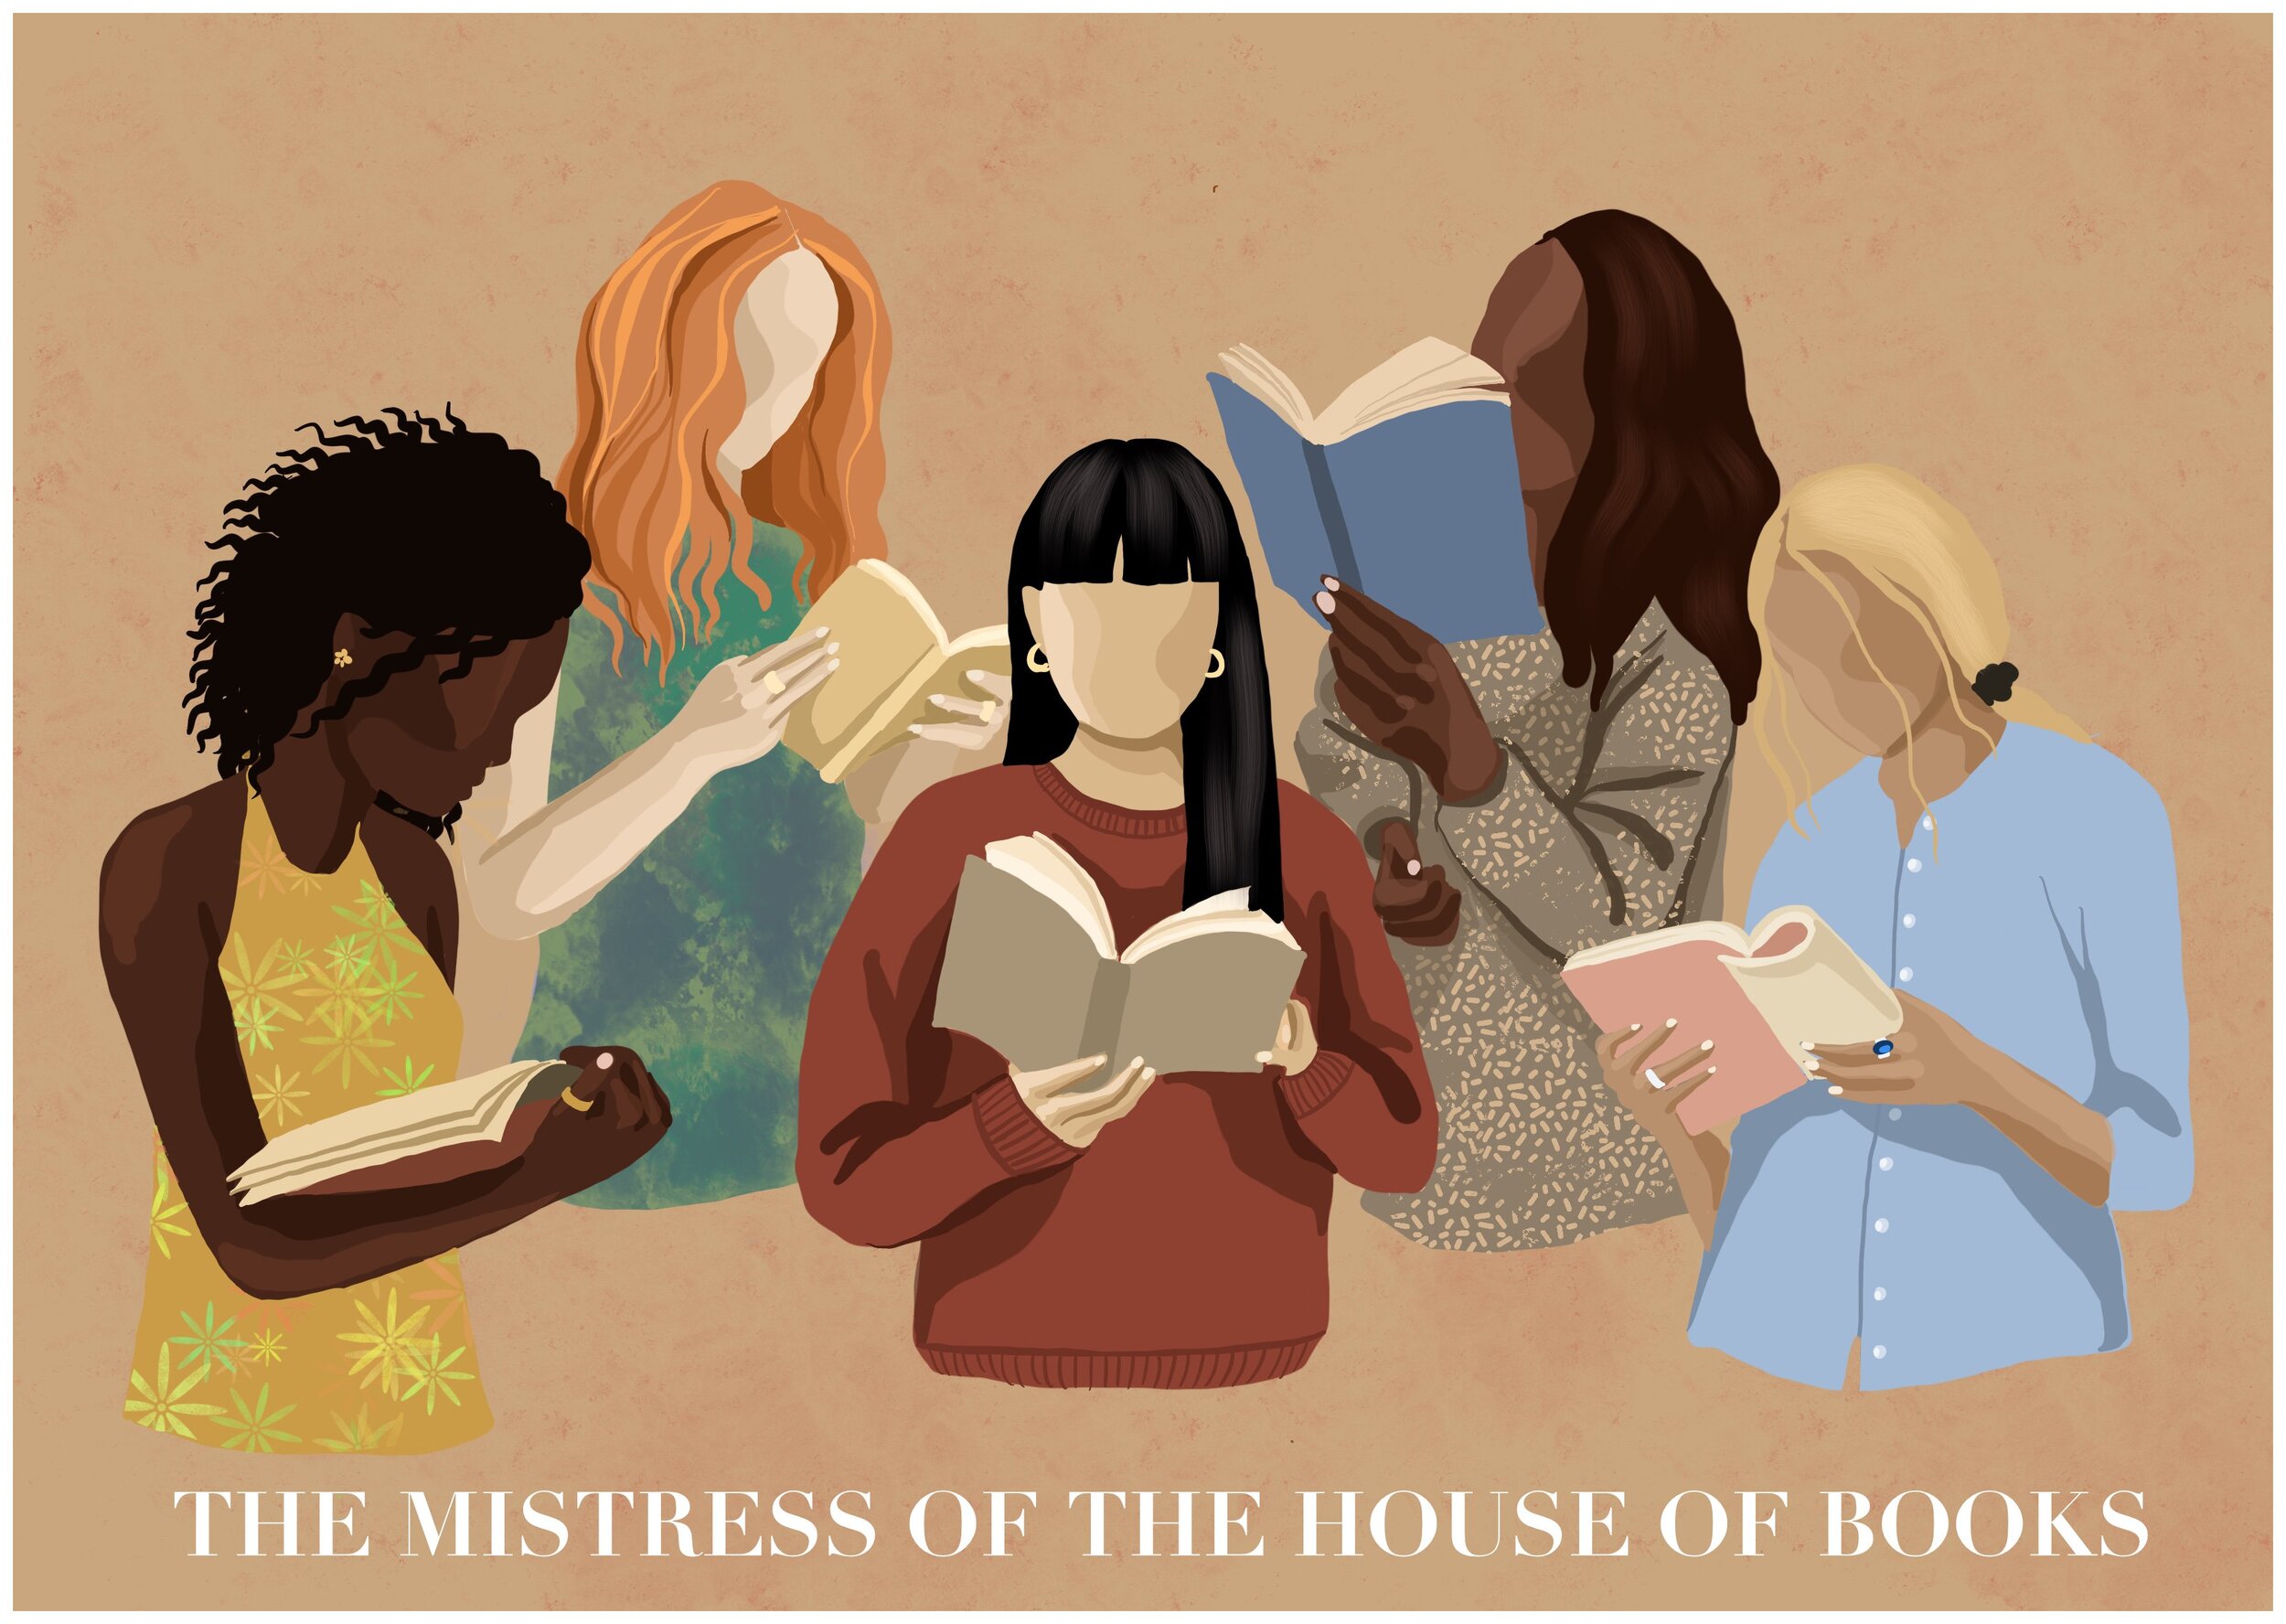 The Mistress of the House of Books